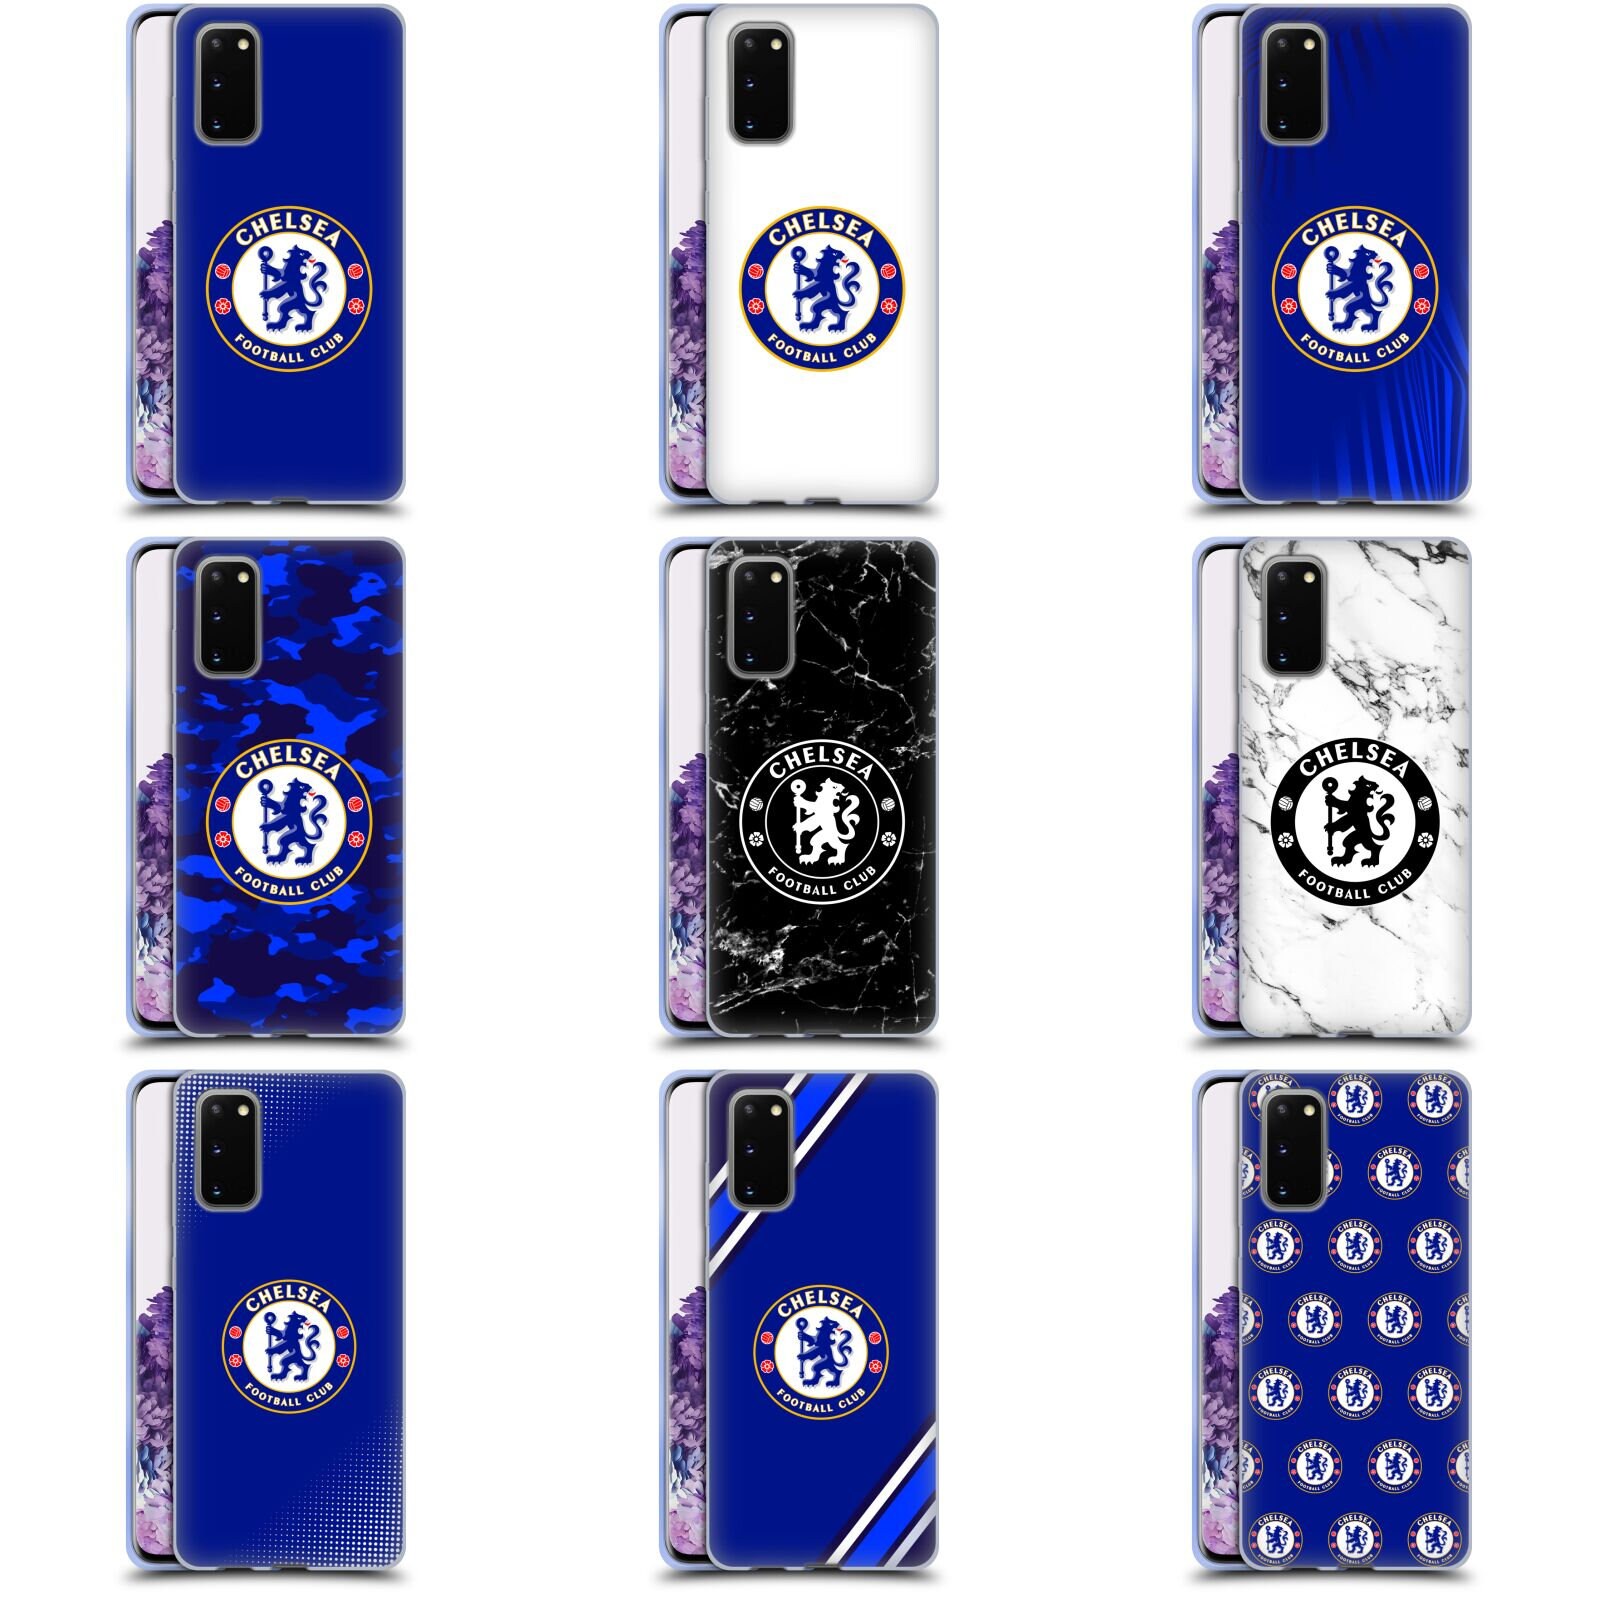 Official Chelsea Football Club Crest Soft Gel Case for Samsung